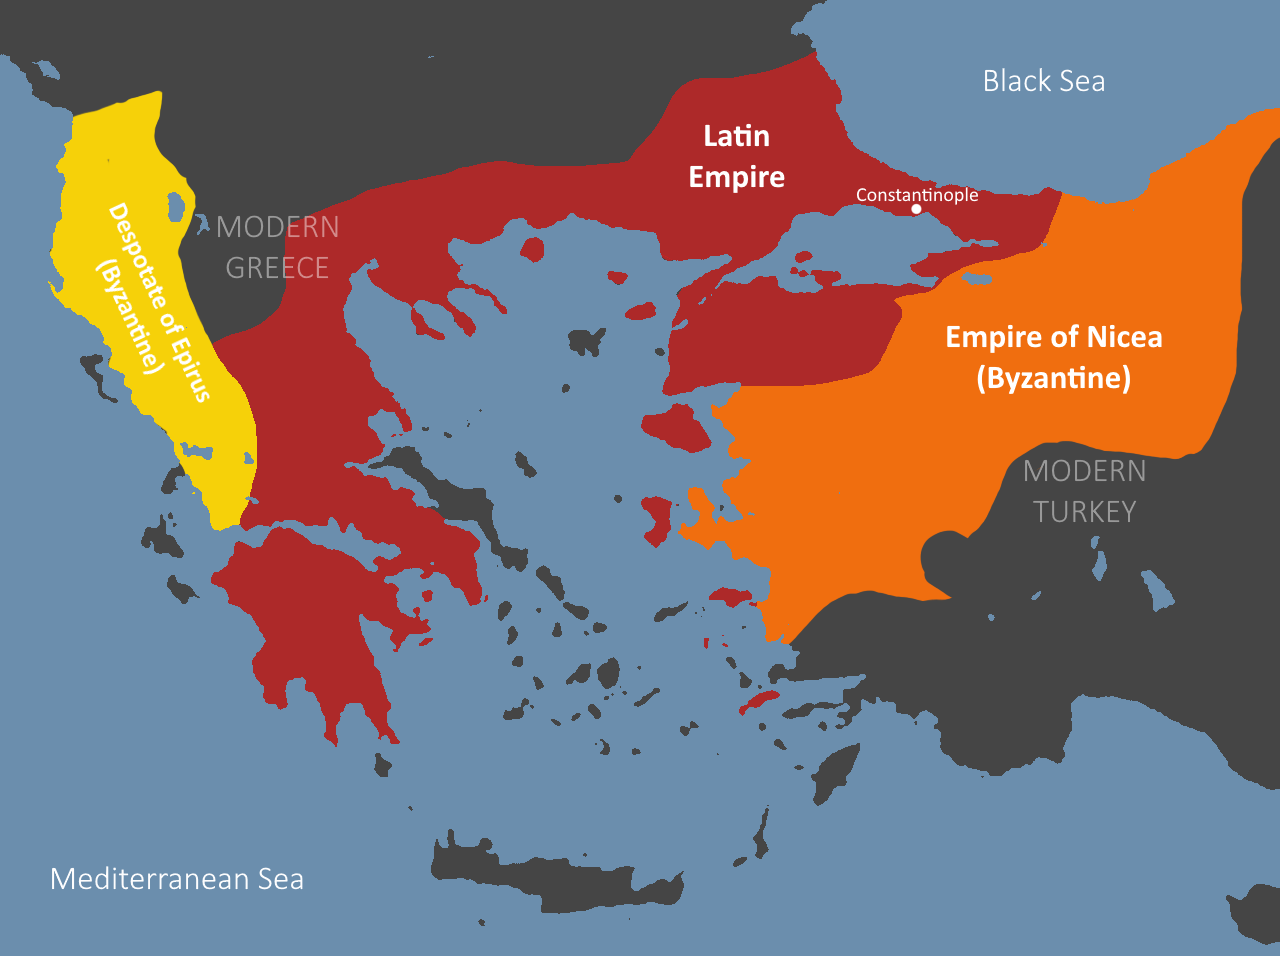 A map of the Latin Empire (red) as of 1204 CE, also showing the Empire of Nicea (orange) and the Despotate of Epirius (yellow) which were still under Byzantine rule.